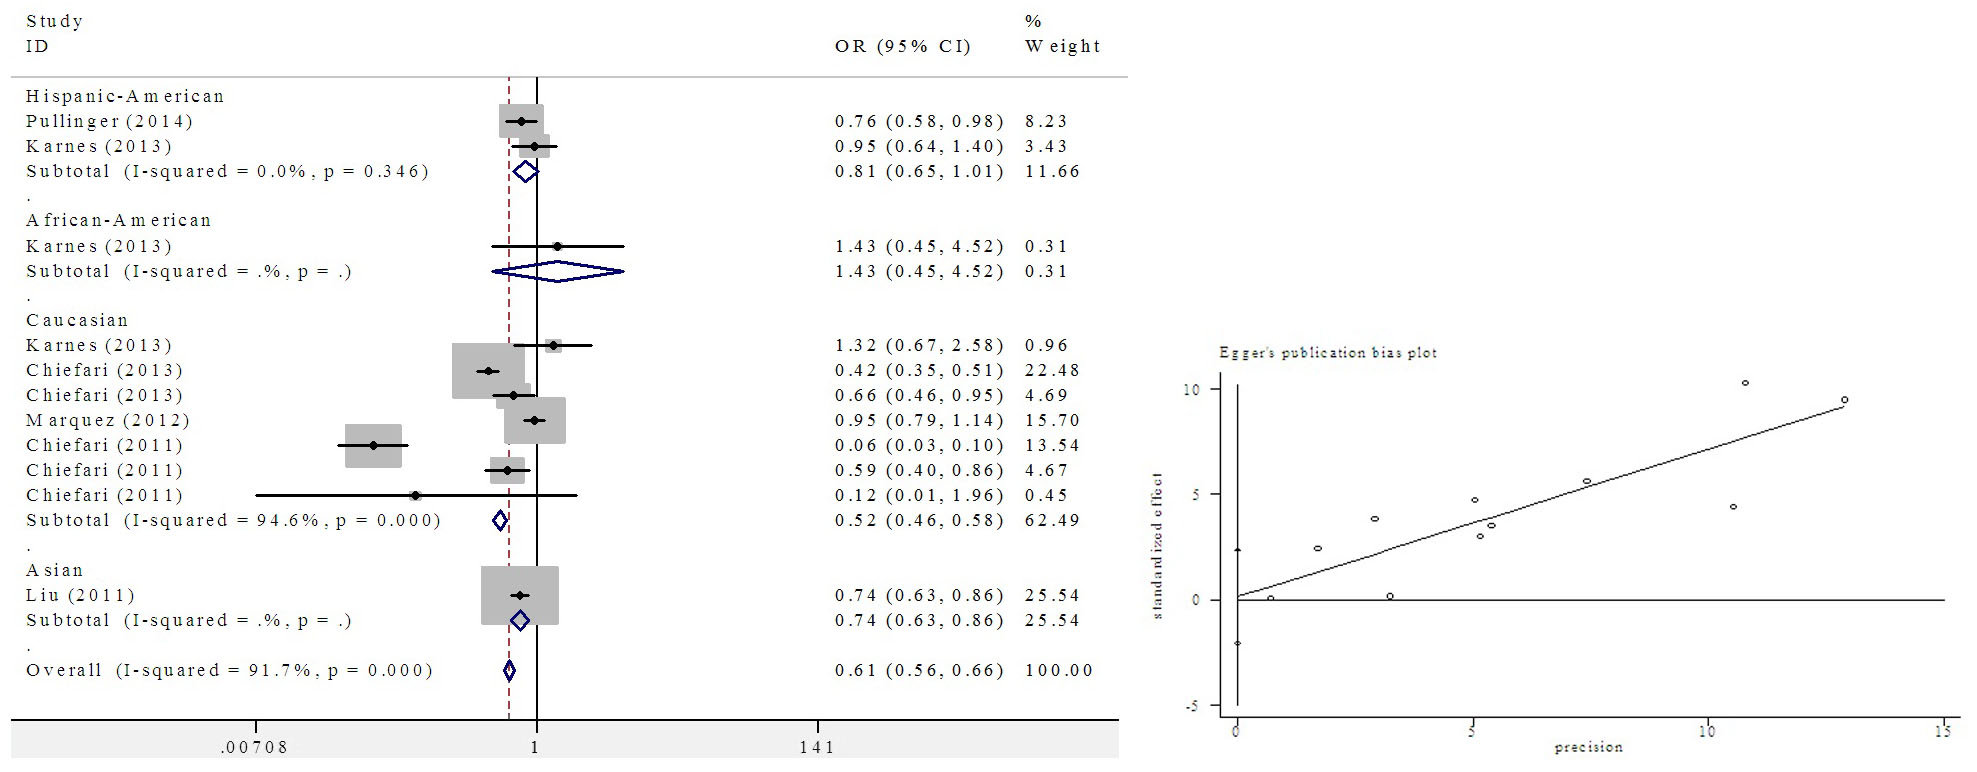 Figure 2: Meta-analysis of the HMGA1 variant IVS5-13insC and T2D